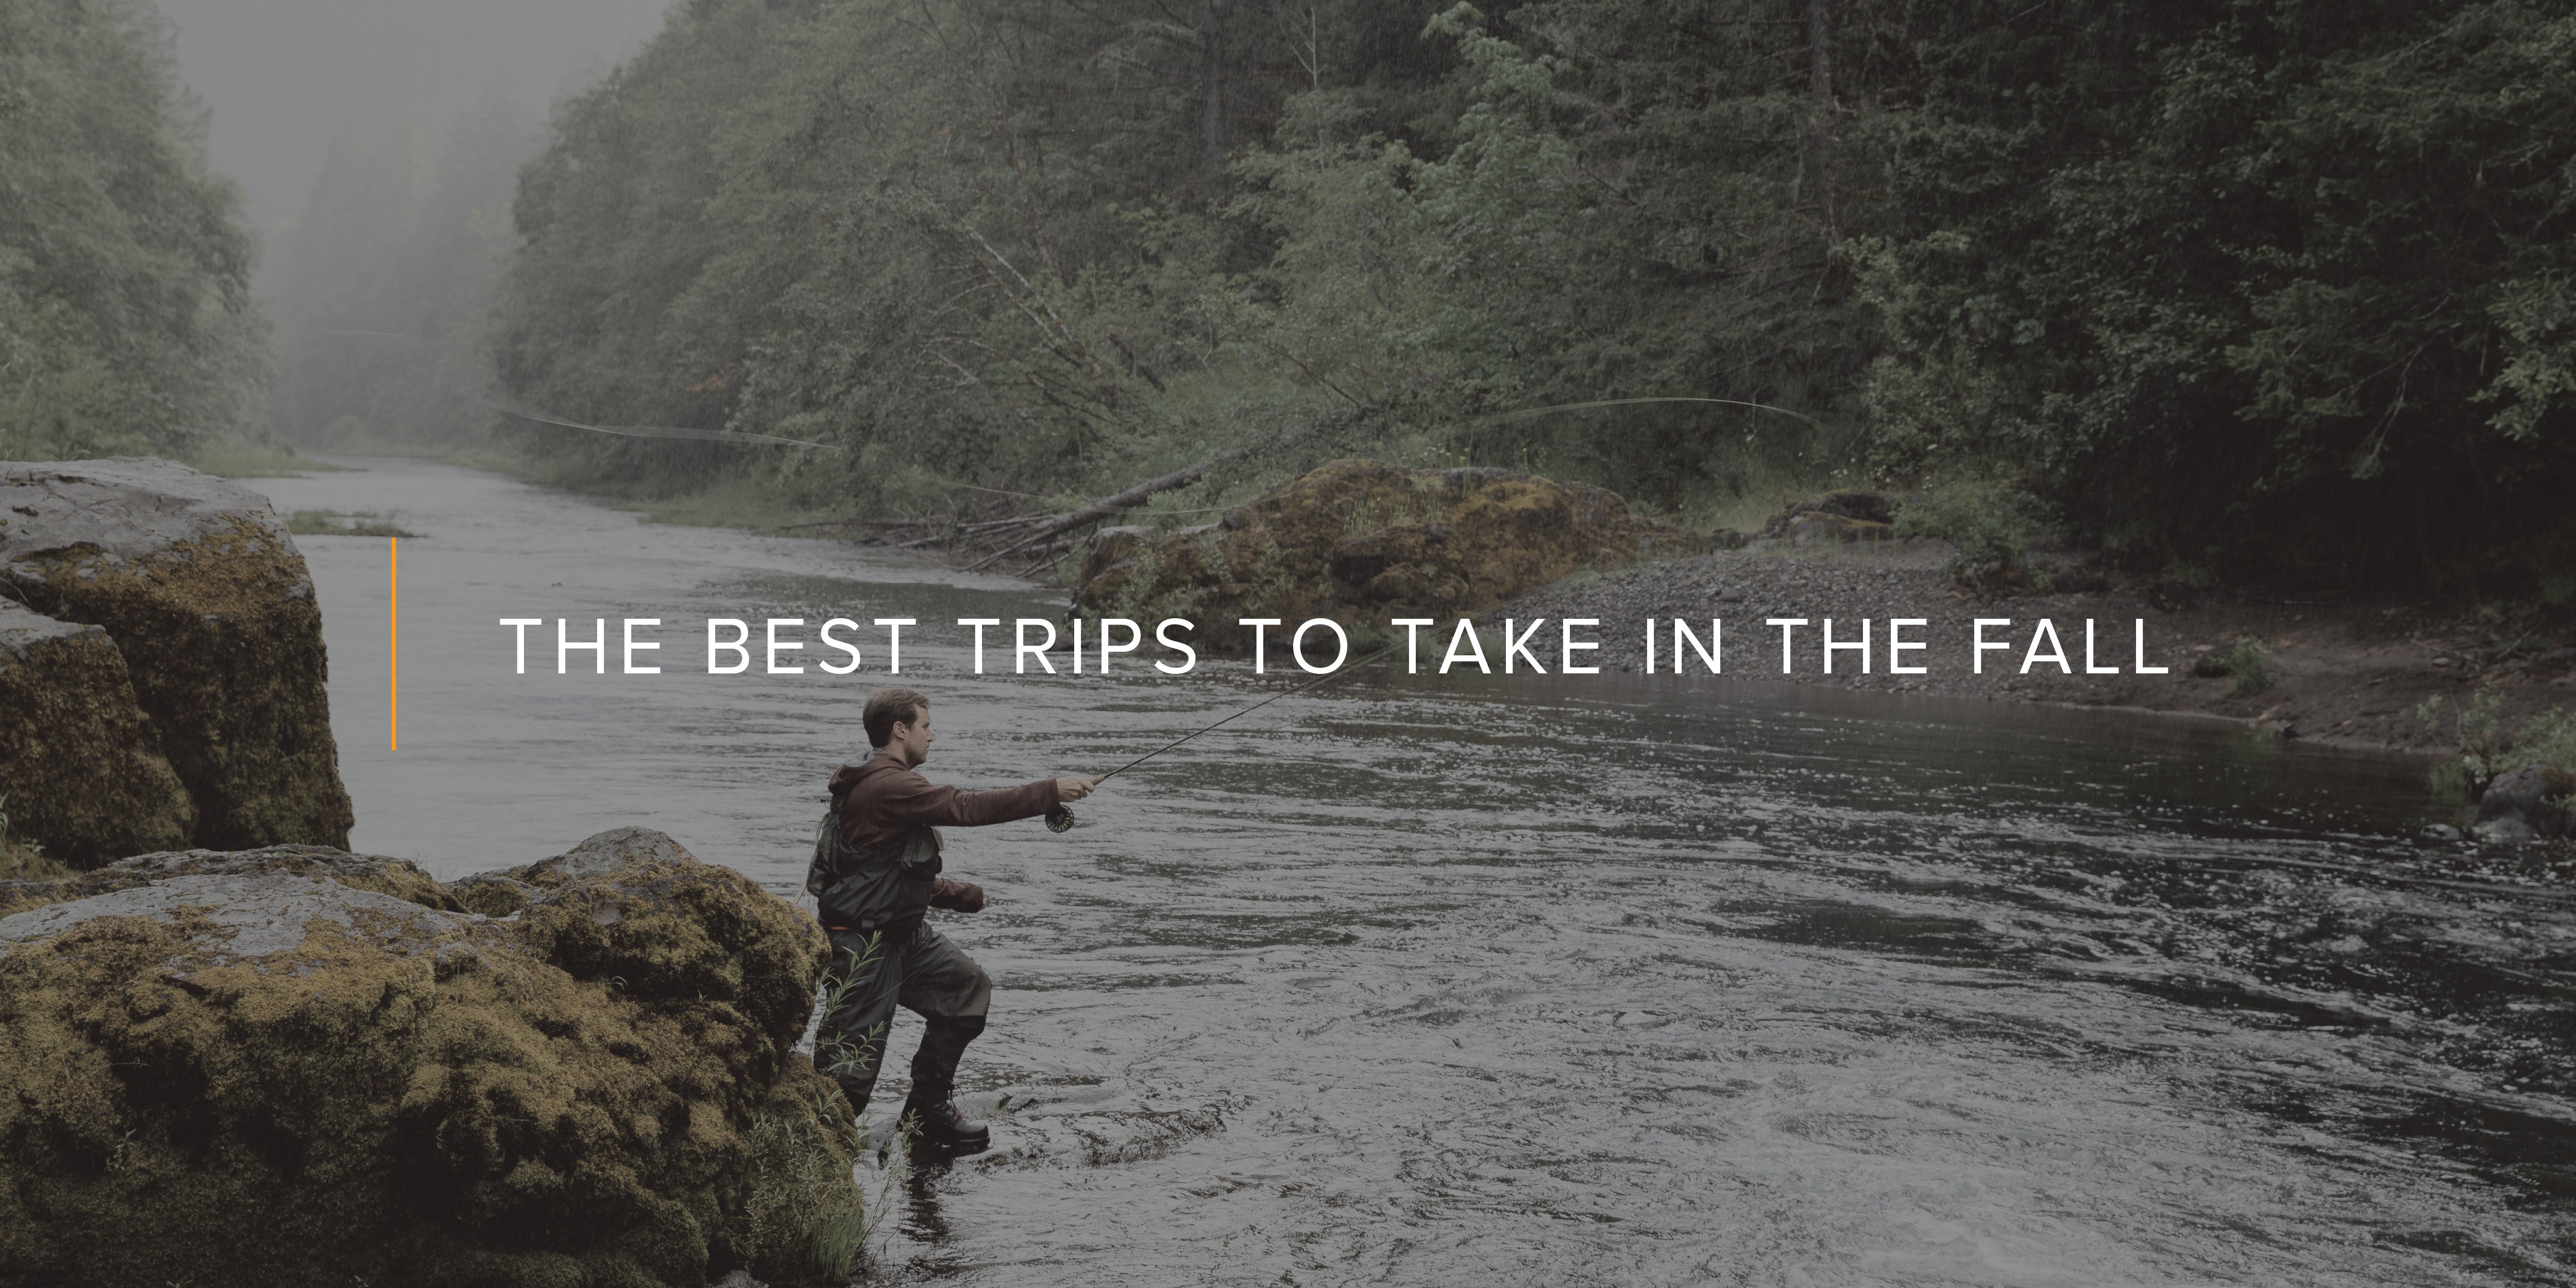 The Best Trips to Take in The Fall